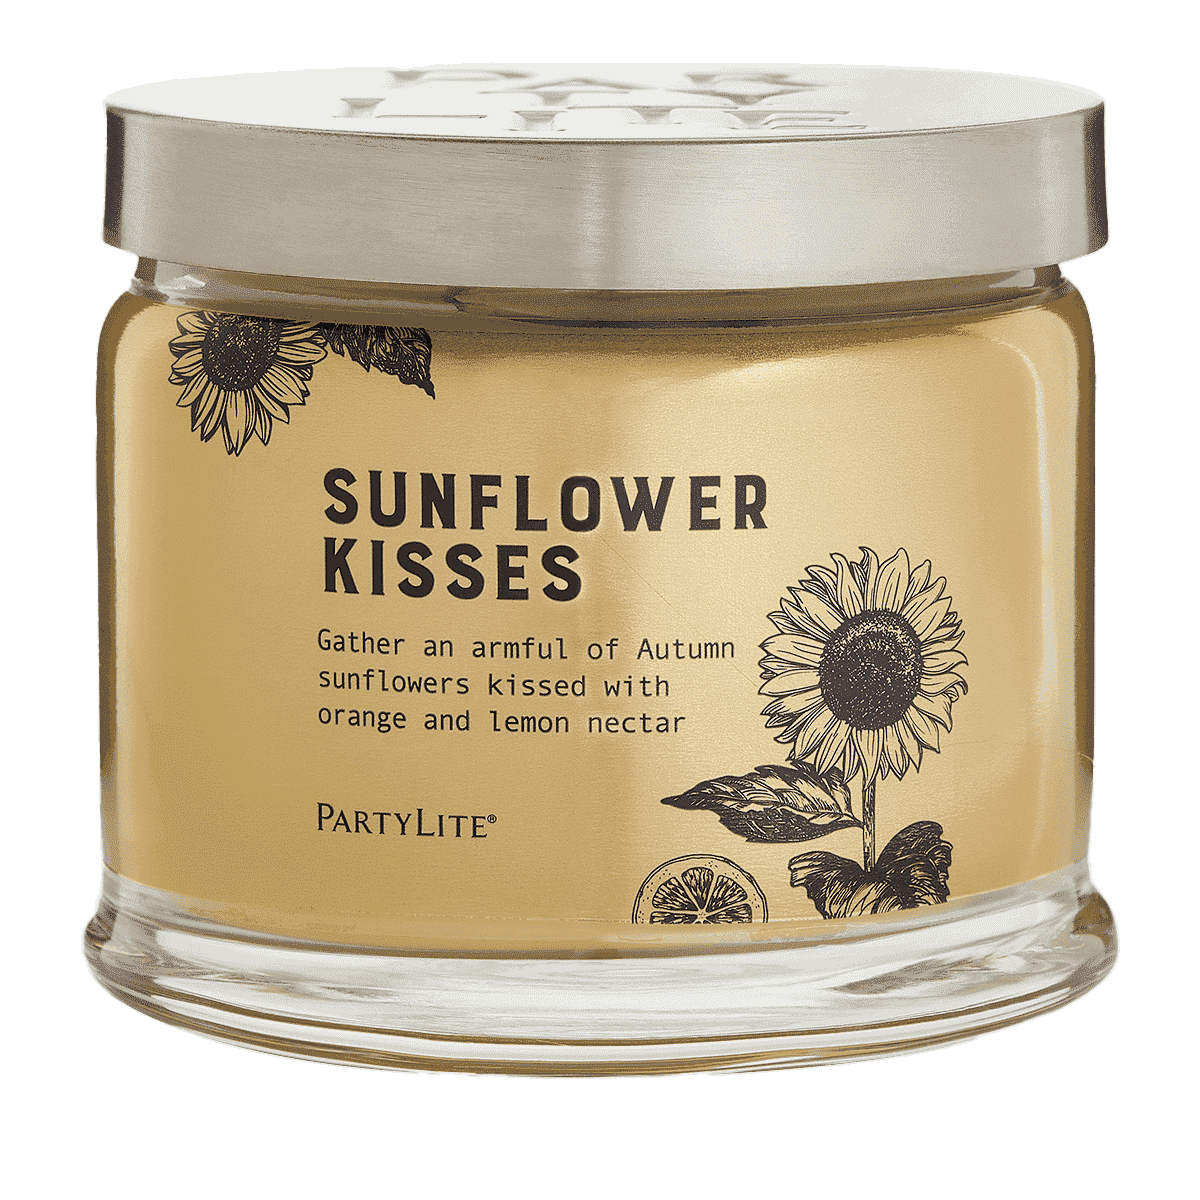 Sunflower Kisses 3-Wick Jar Candle